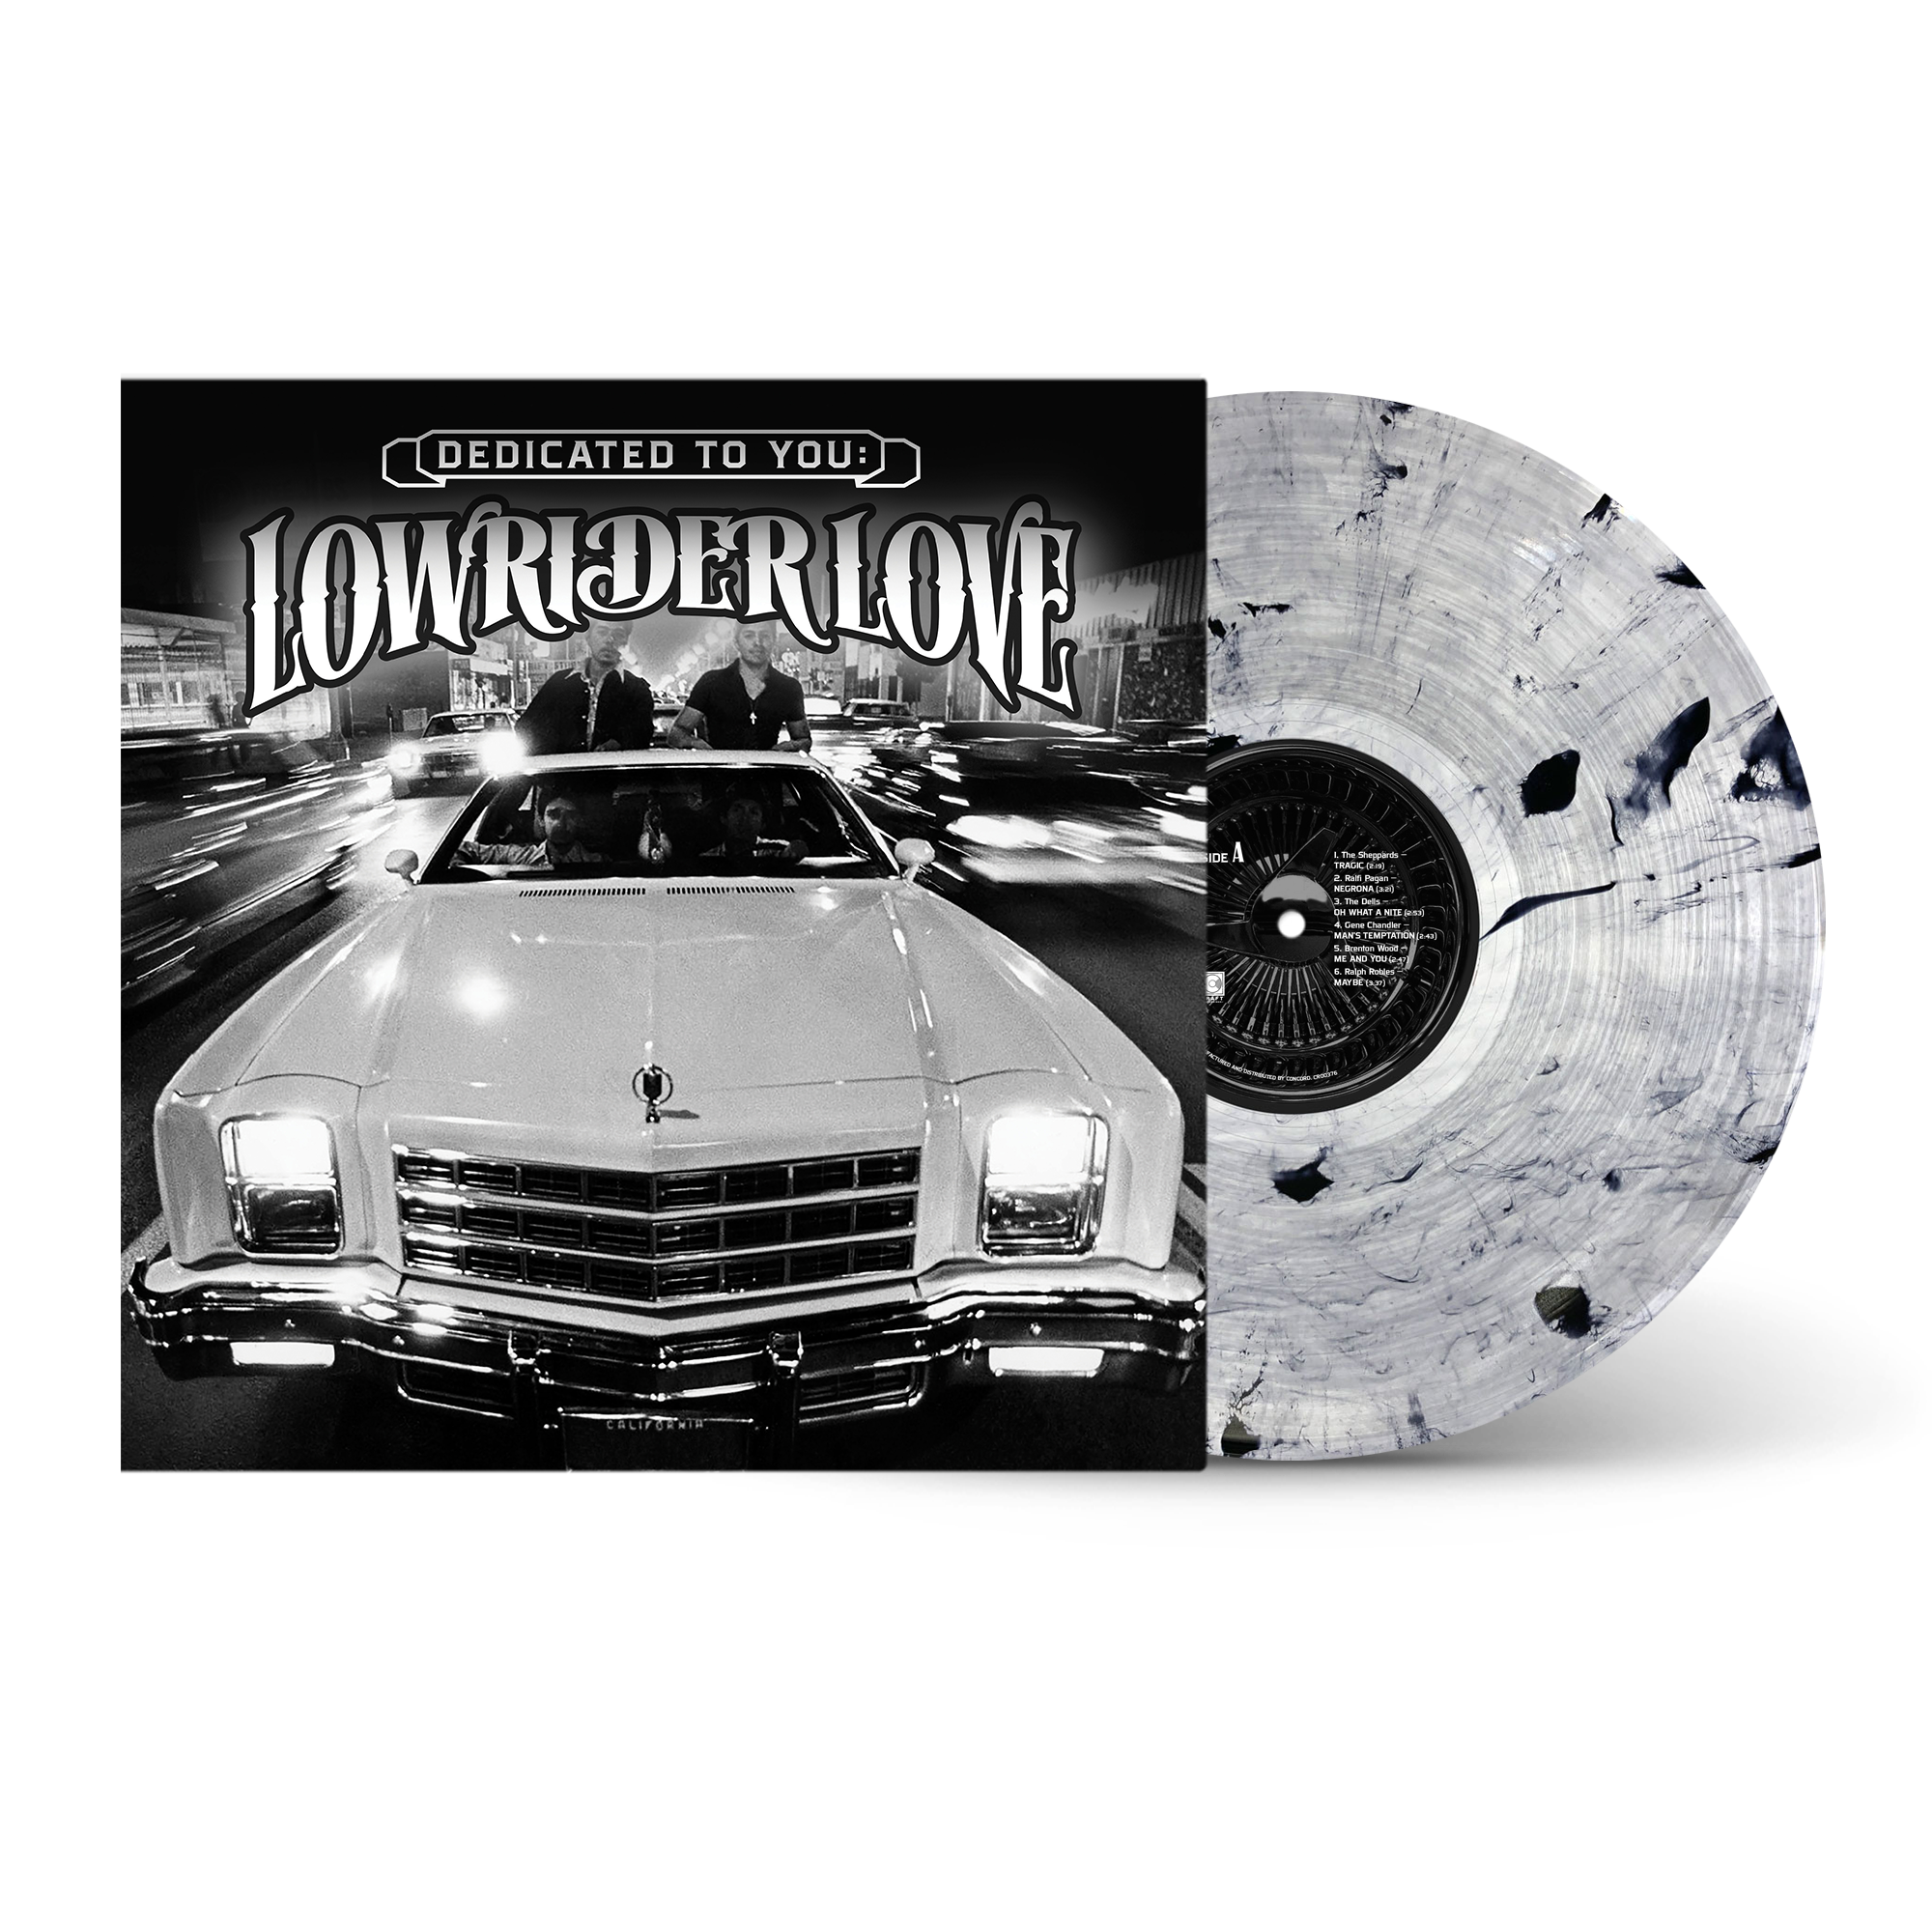 Dedicated To You: Lowrider Love (Clear Black Swirl LP)